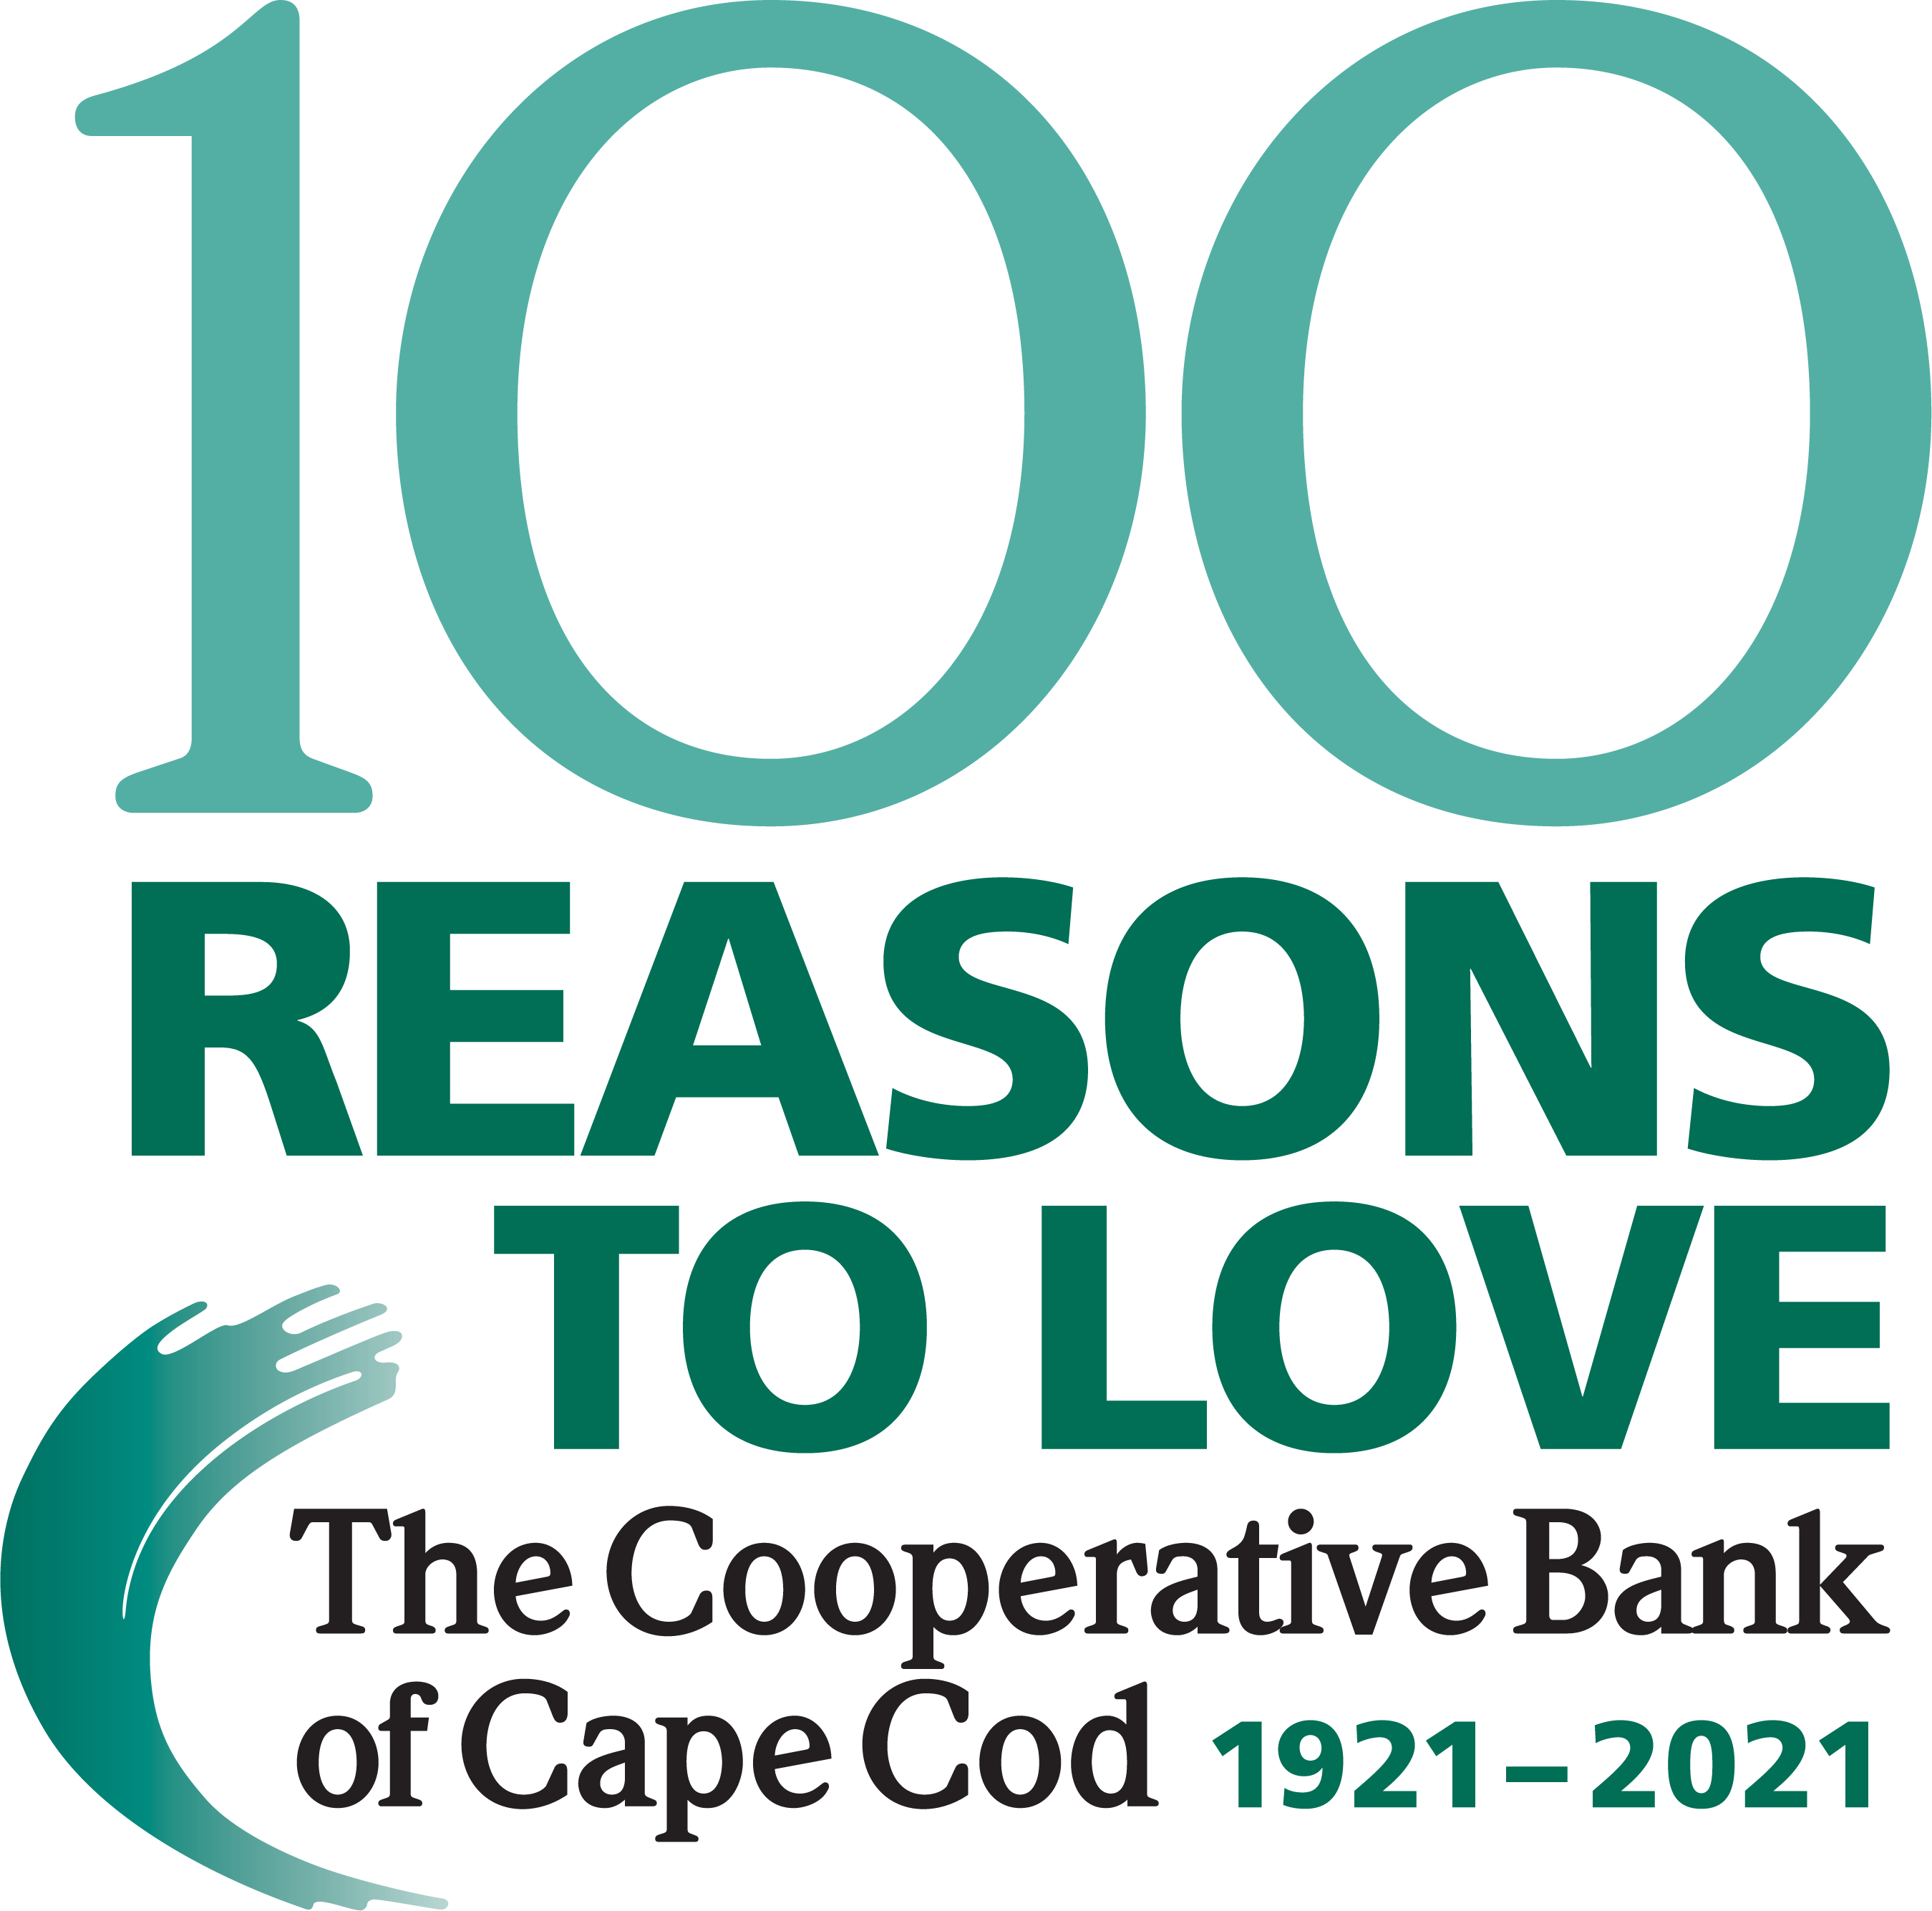 Cooperative Bank of Cape Cod